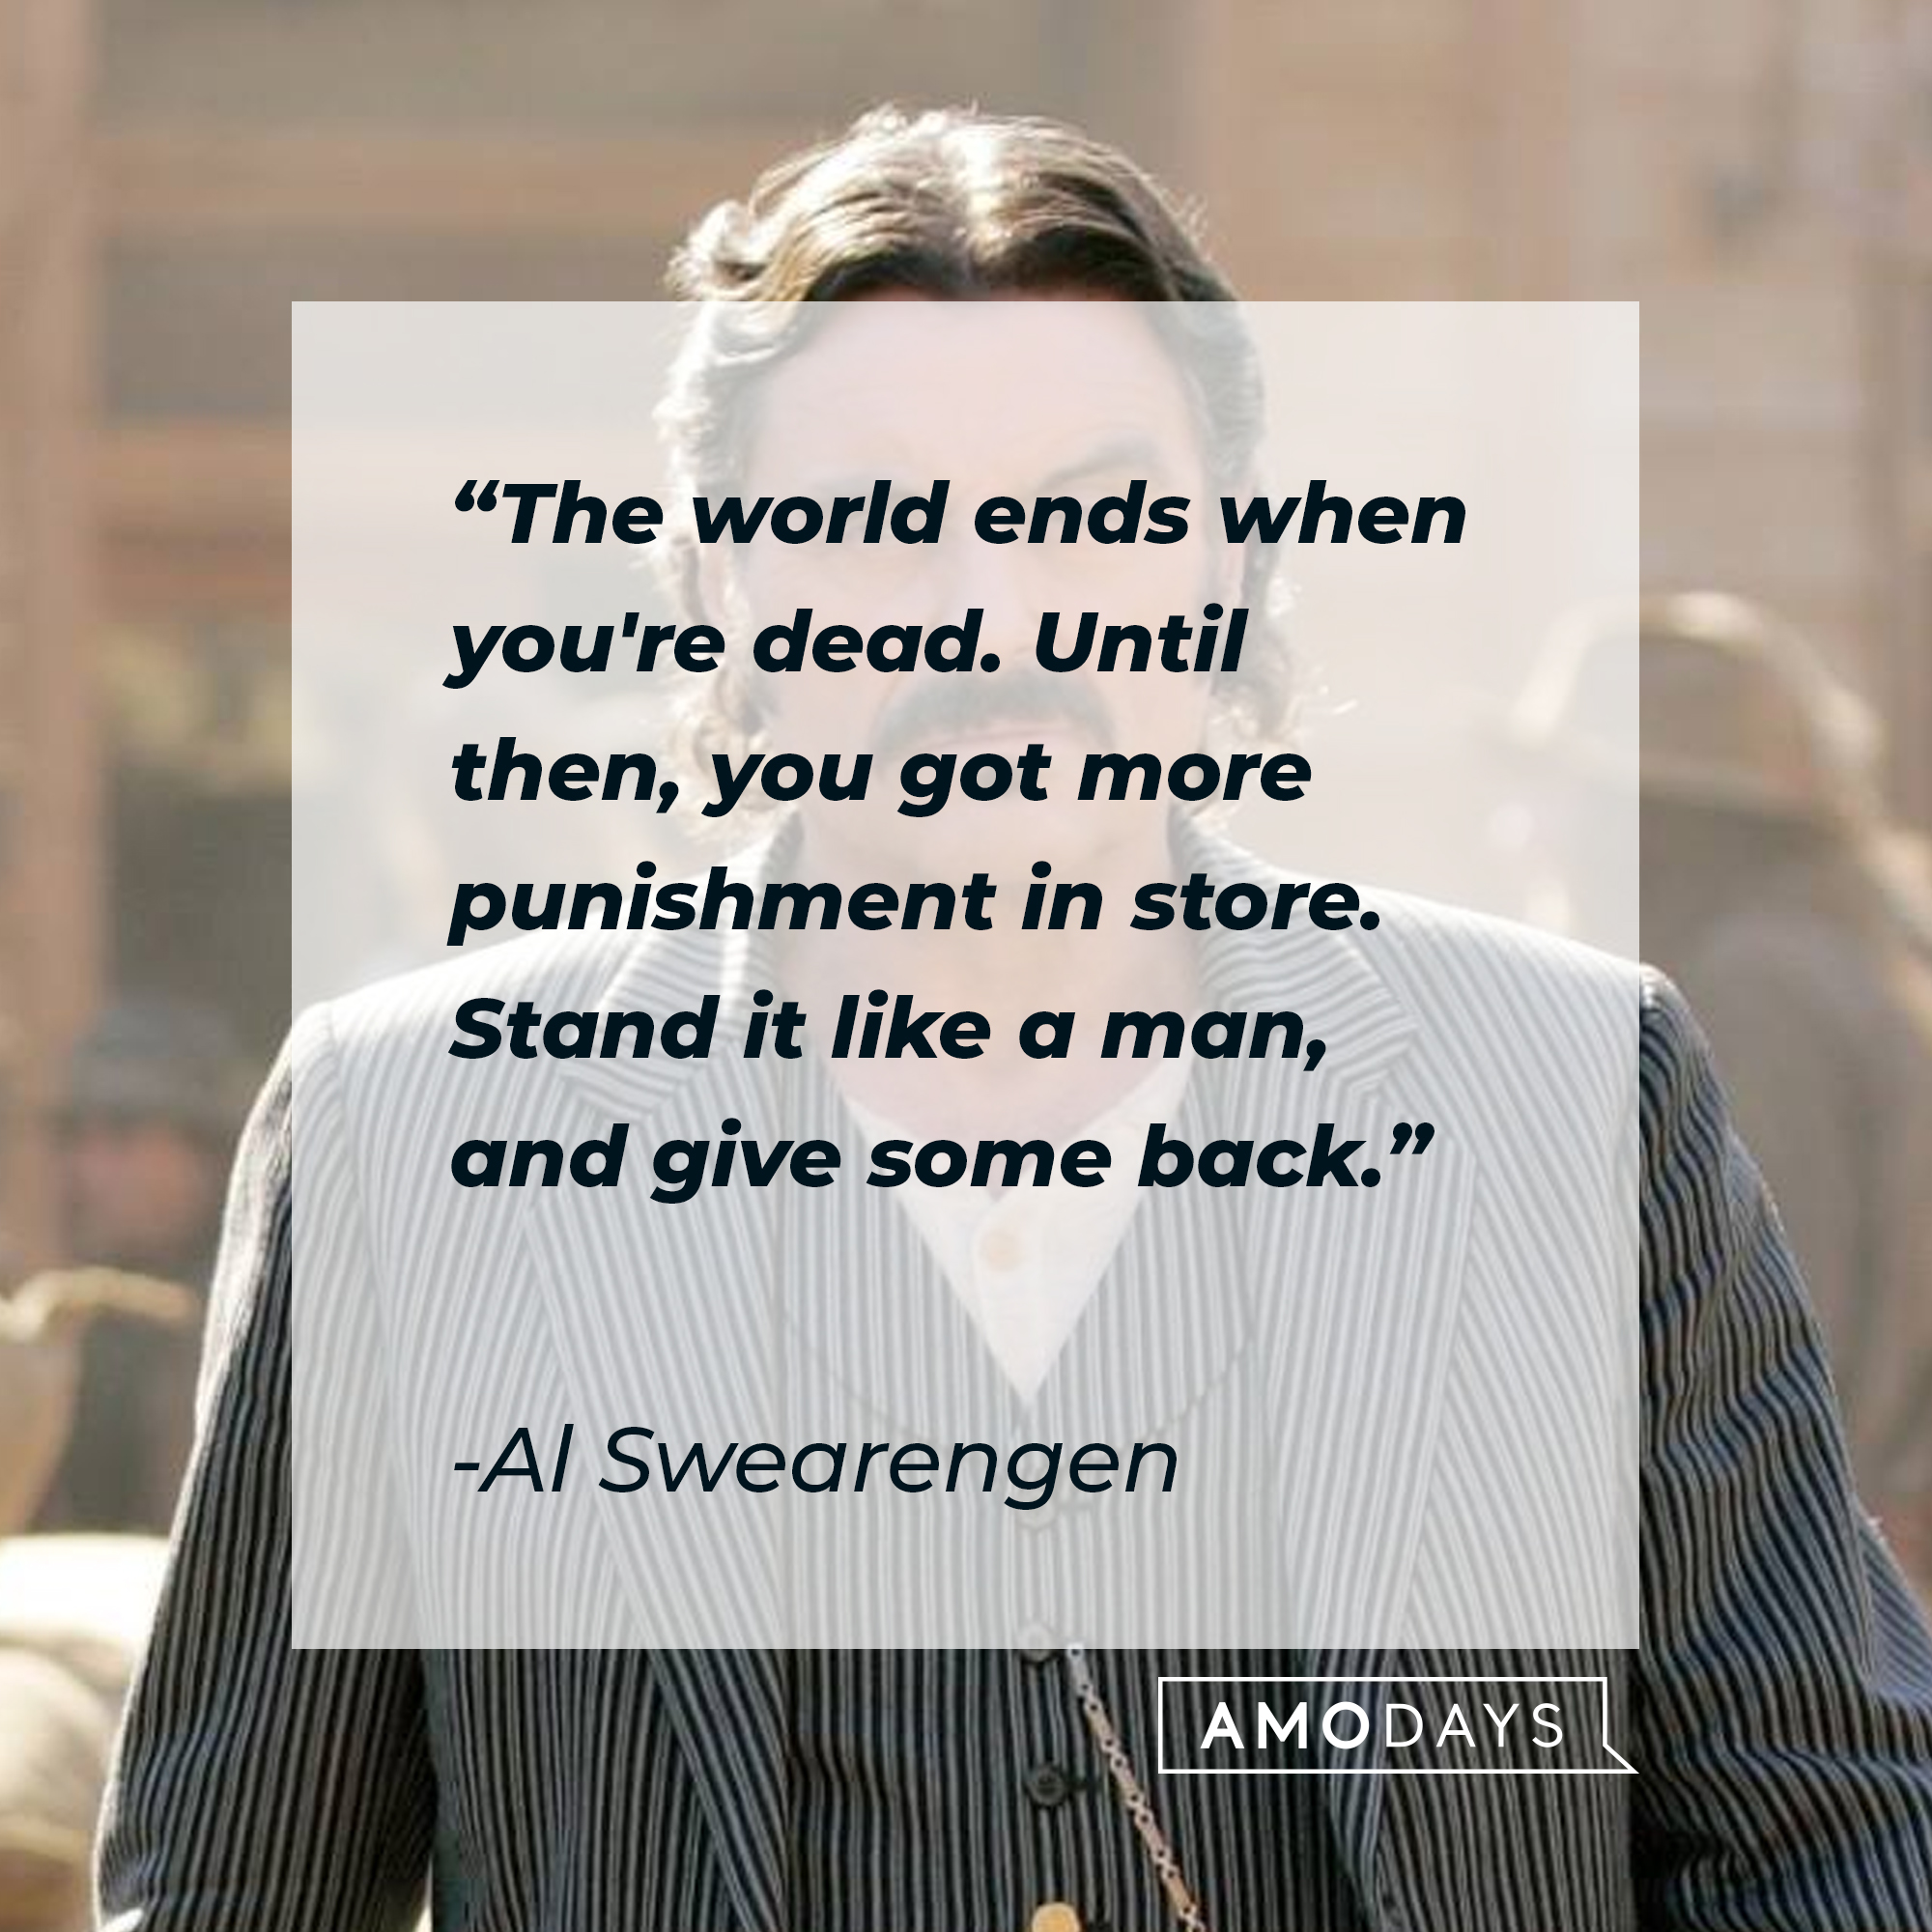 Al Swearengen with his quote, "The world ends when you're dead. Until then, you got more punishment in store. Stand it like a man, and give some back." | Source: Facebook/Deadwood